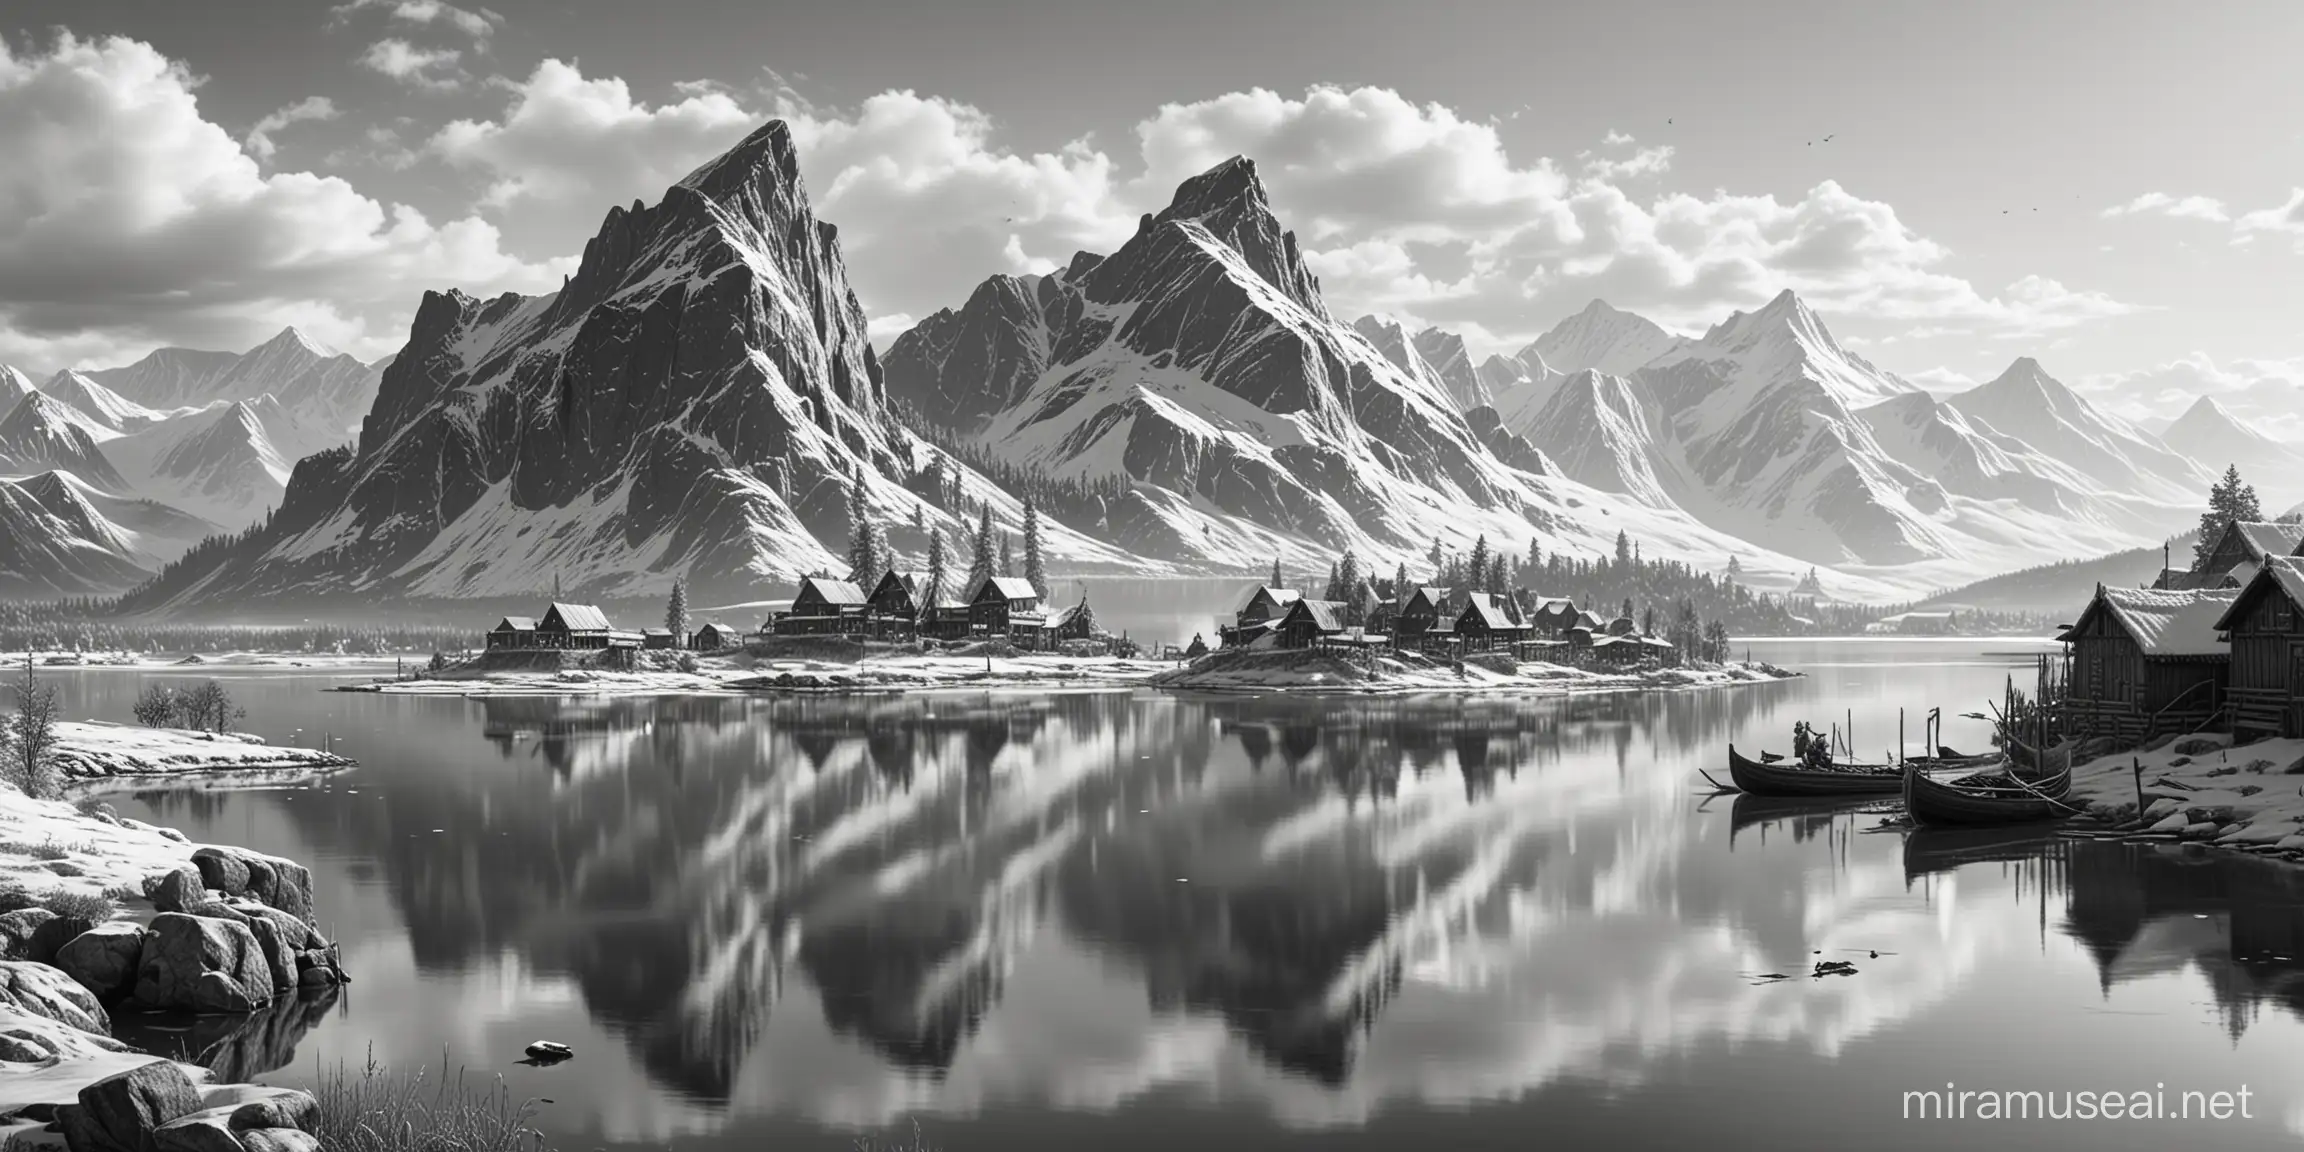 Vikings, clear skies with floating islands, tall snowy mountains with distant northern village with lake, detailed black and white Illustration